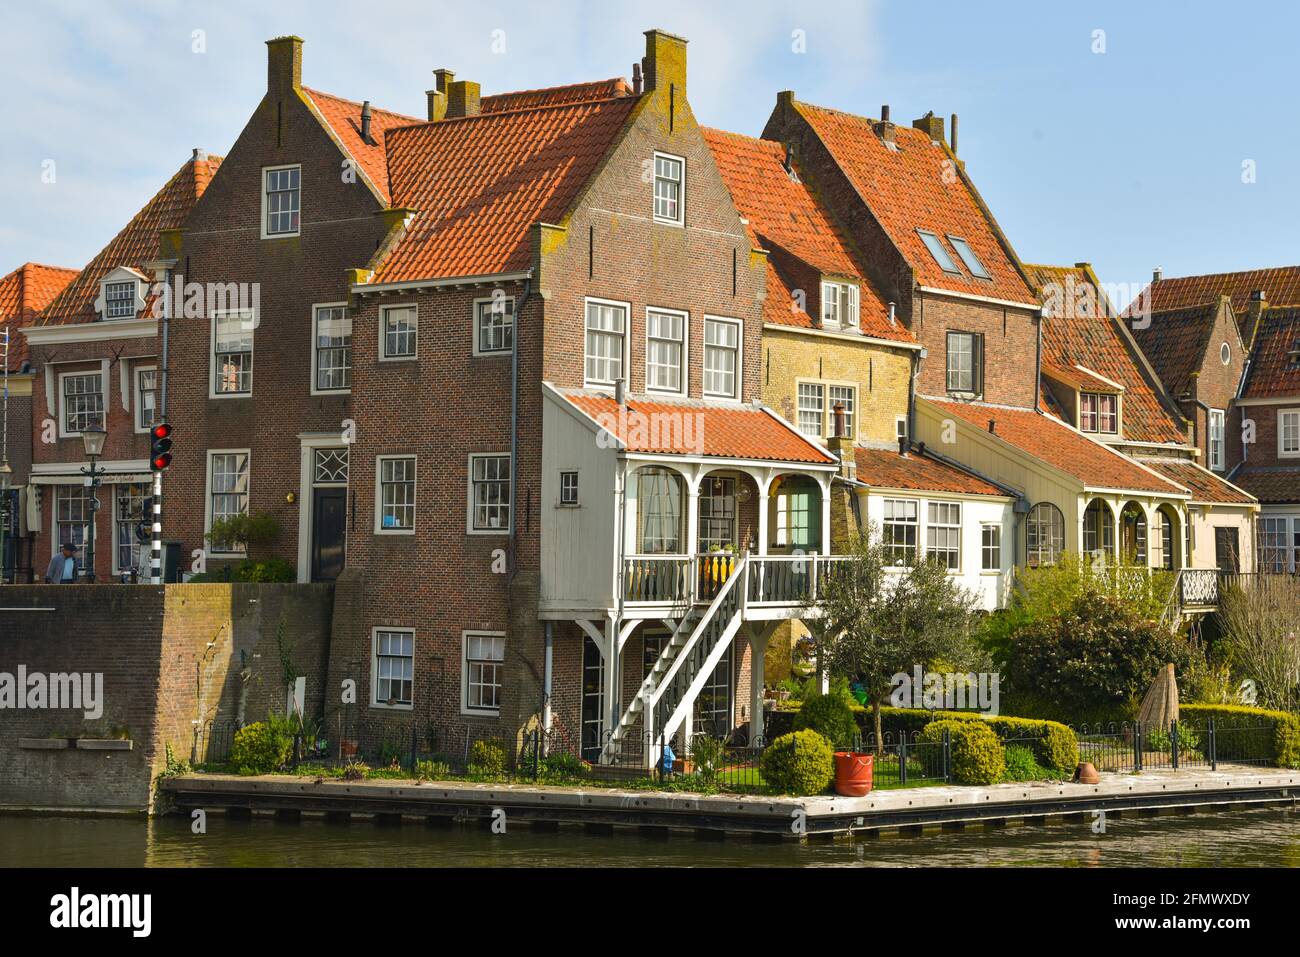 Enkhuizen, the Netherlands - May 2020. The port of Enkhuizen, with its old houses and traditional gables. Stock Photo